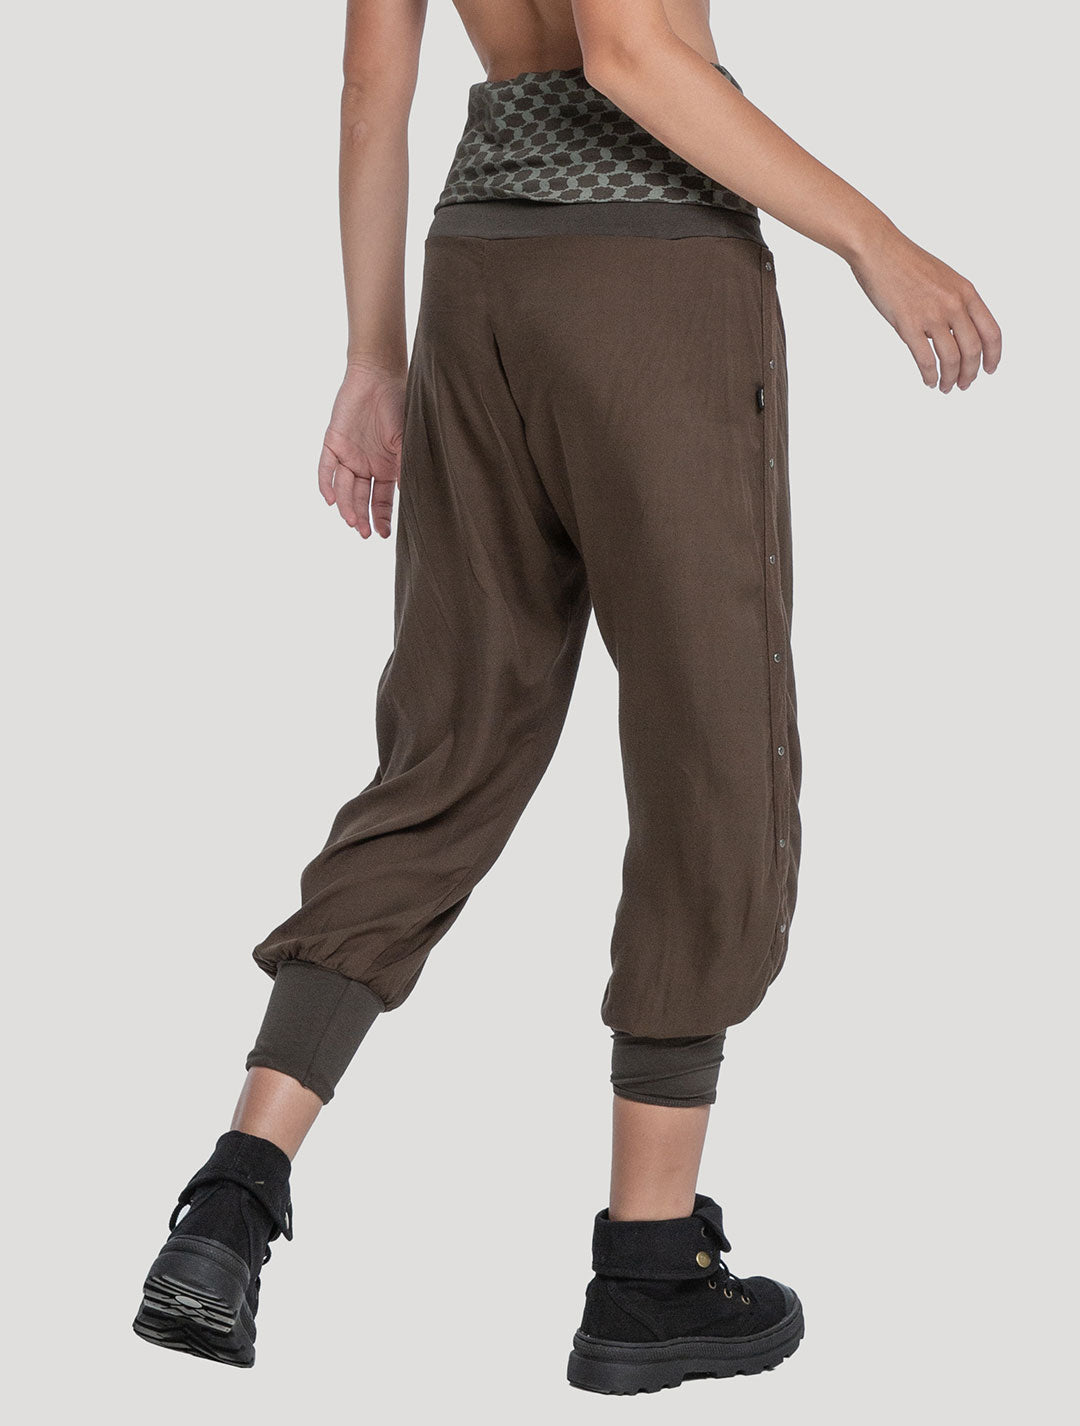 Women's Trousers, Pants, and Shorts: Embrace Alternative Style Tagged Harem  - Psylo